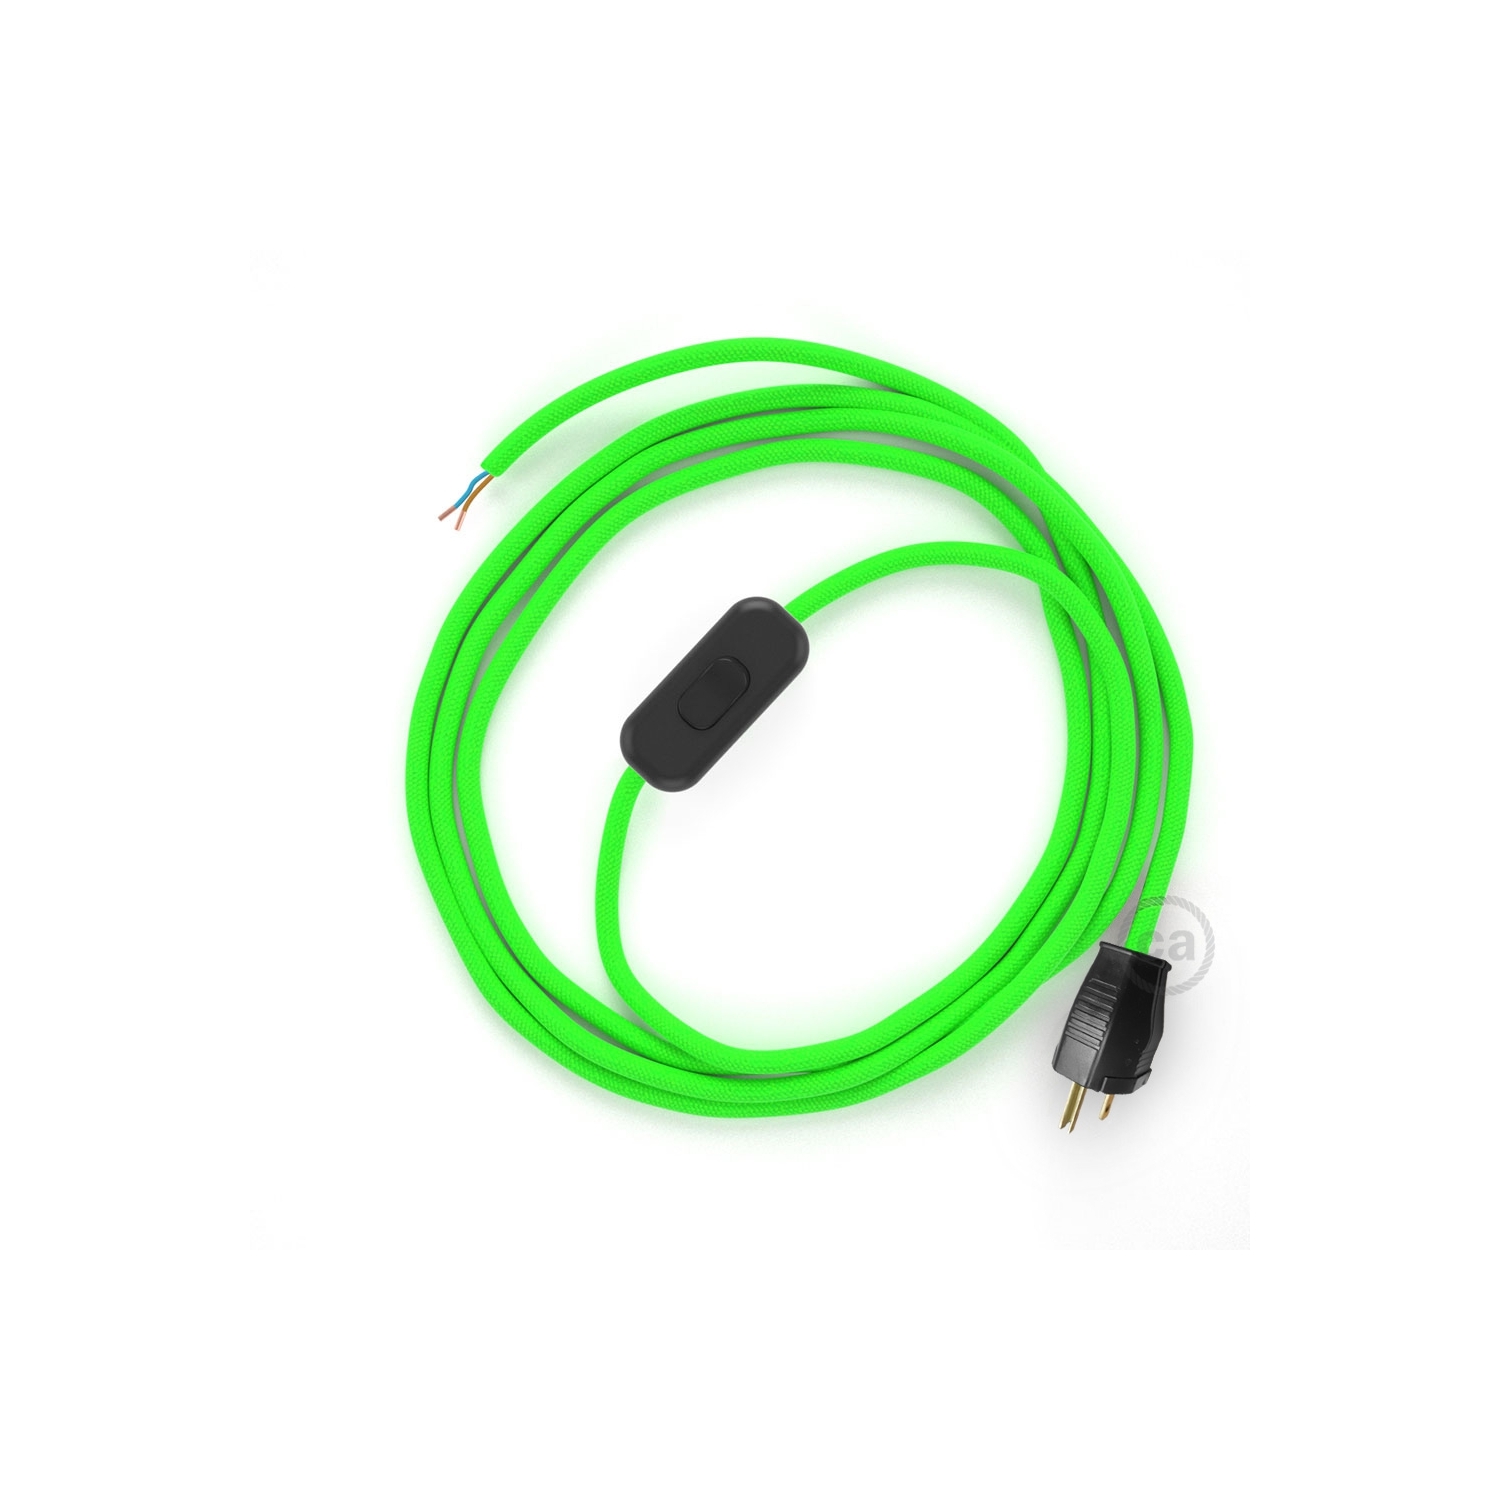 Power Cord with in-line switch, RF06 Neon Green - Choose color of switch/plug